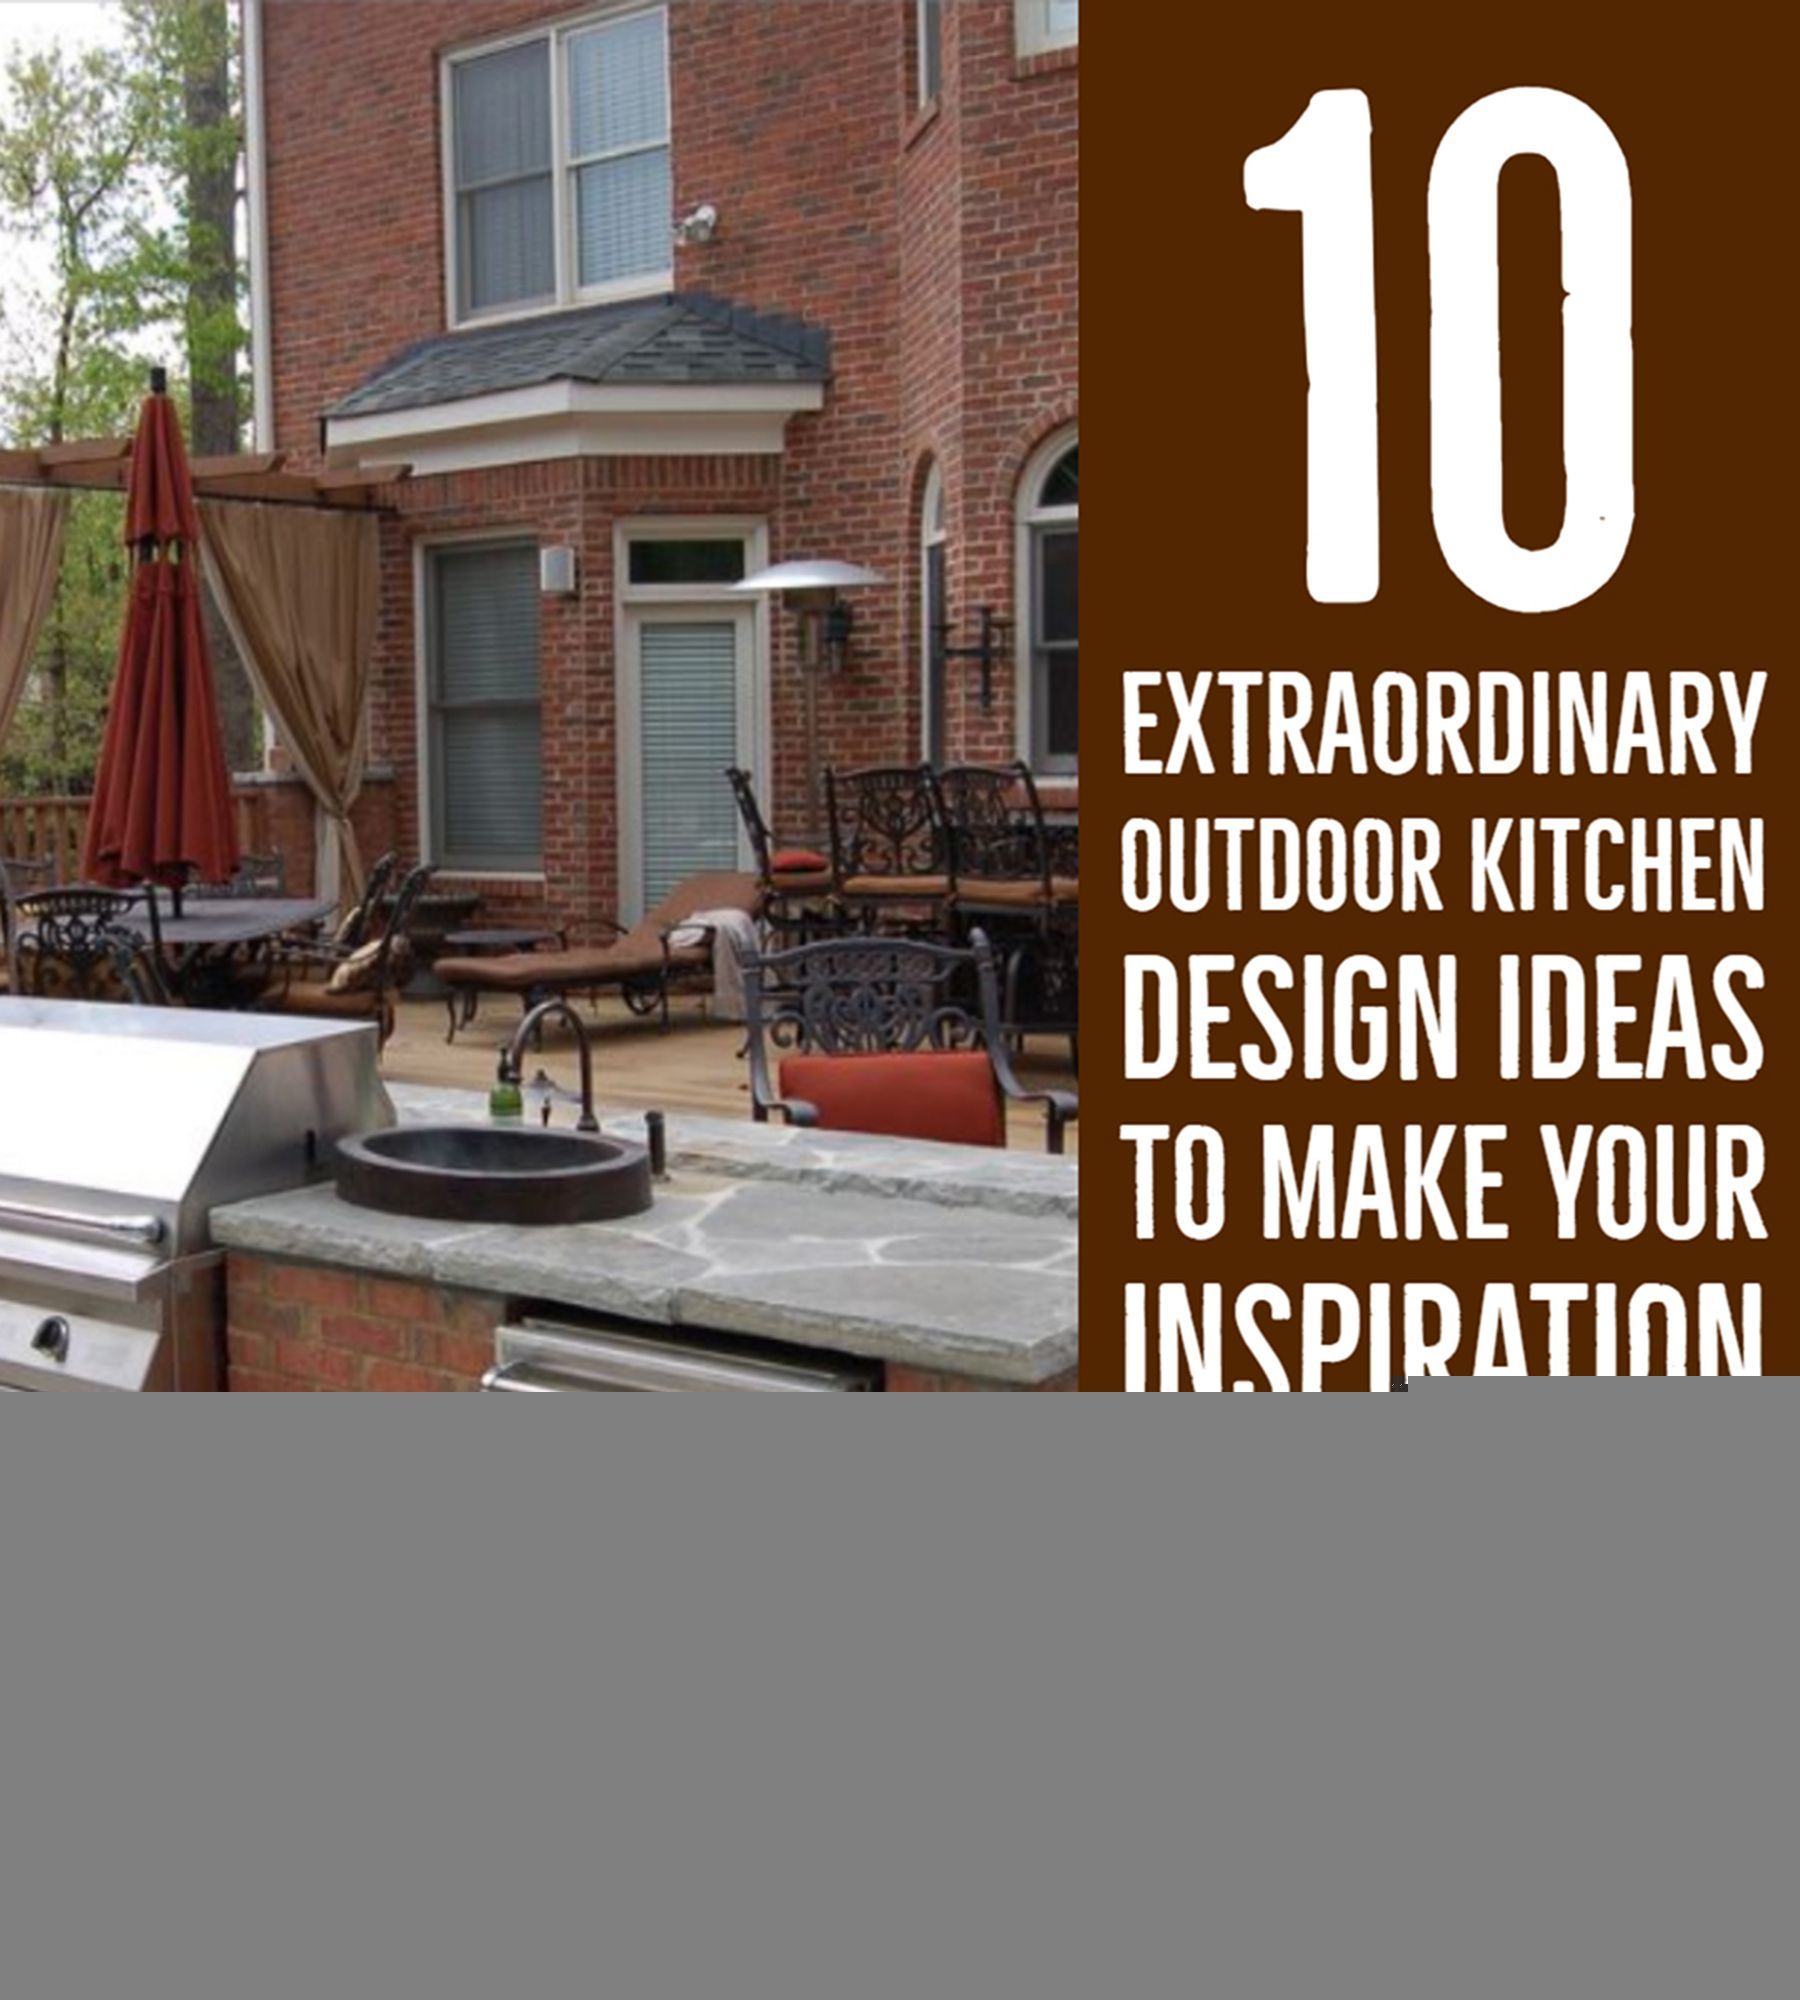 10 Extraordinary Outdoor Kitchen Design Ideas To Make Your